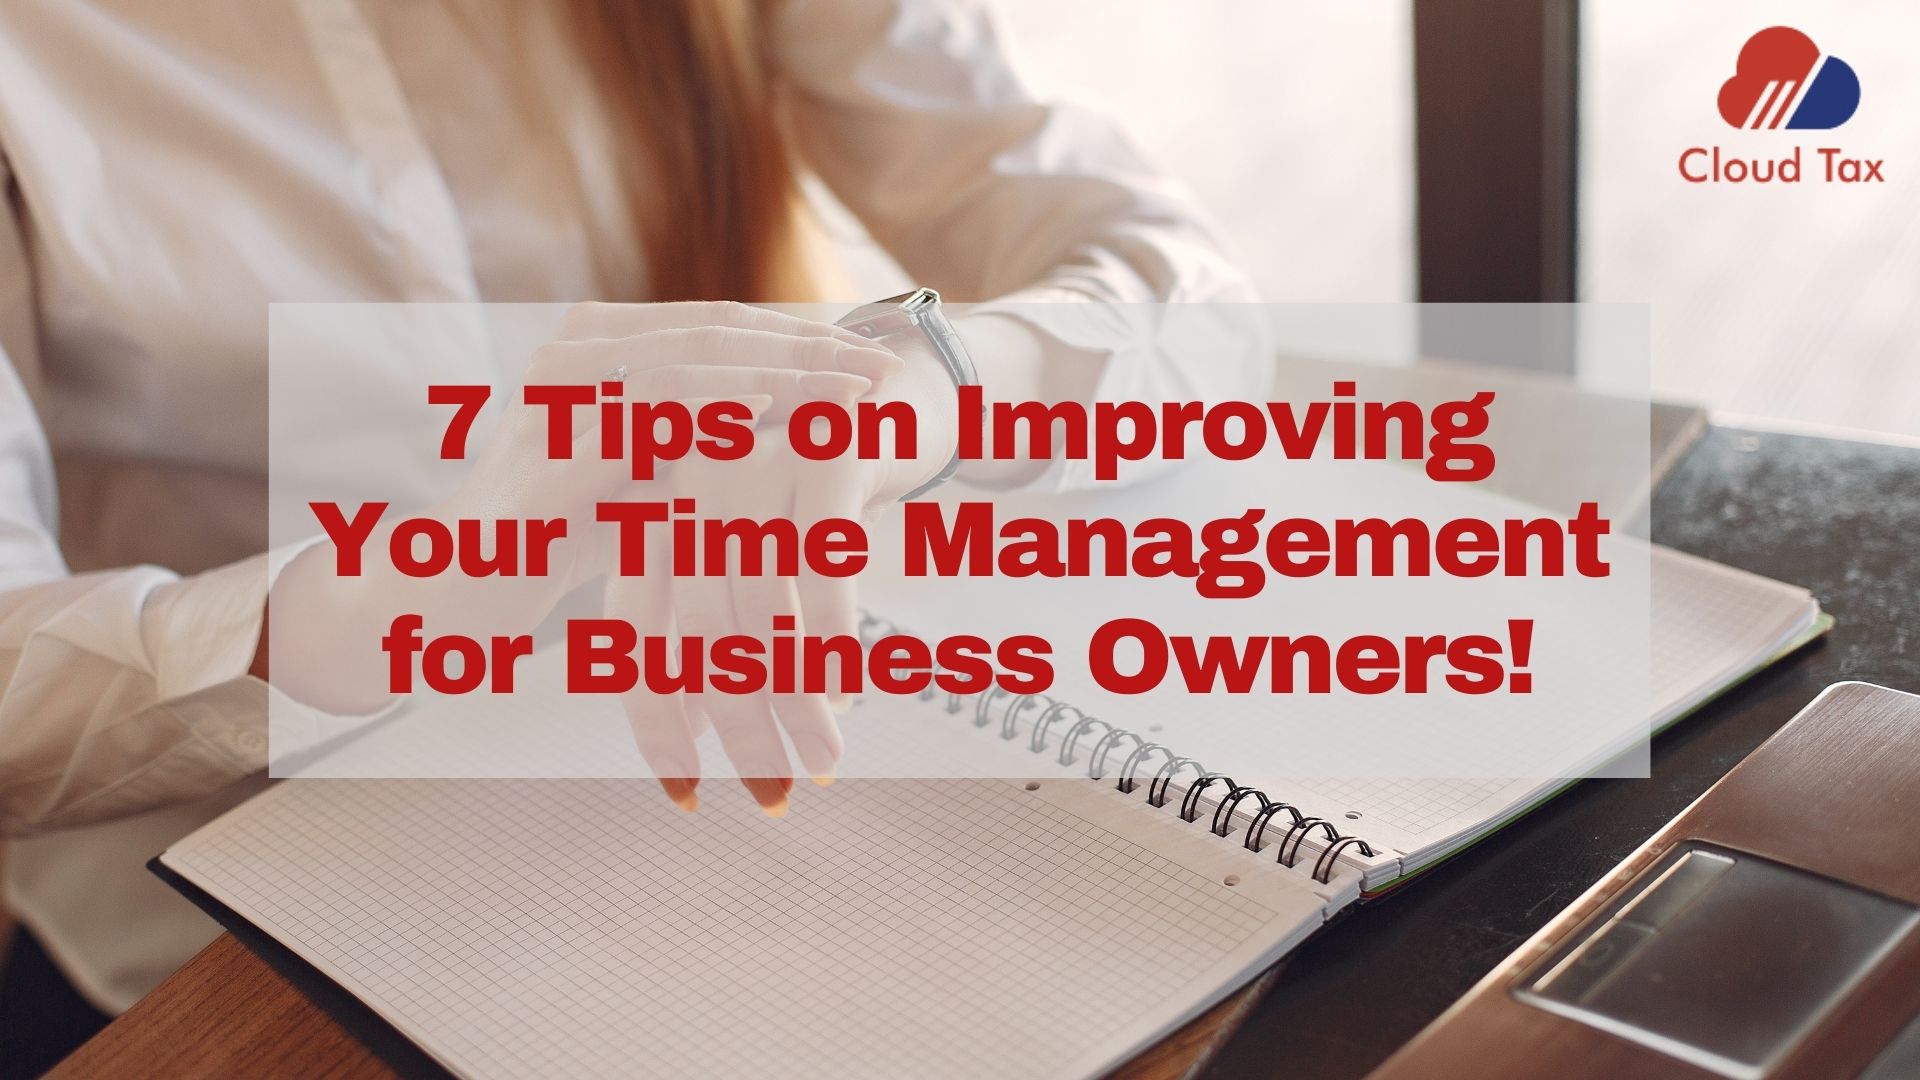 7 Tips on Improving Your Time Management for Business Owners!